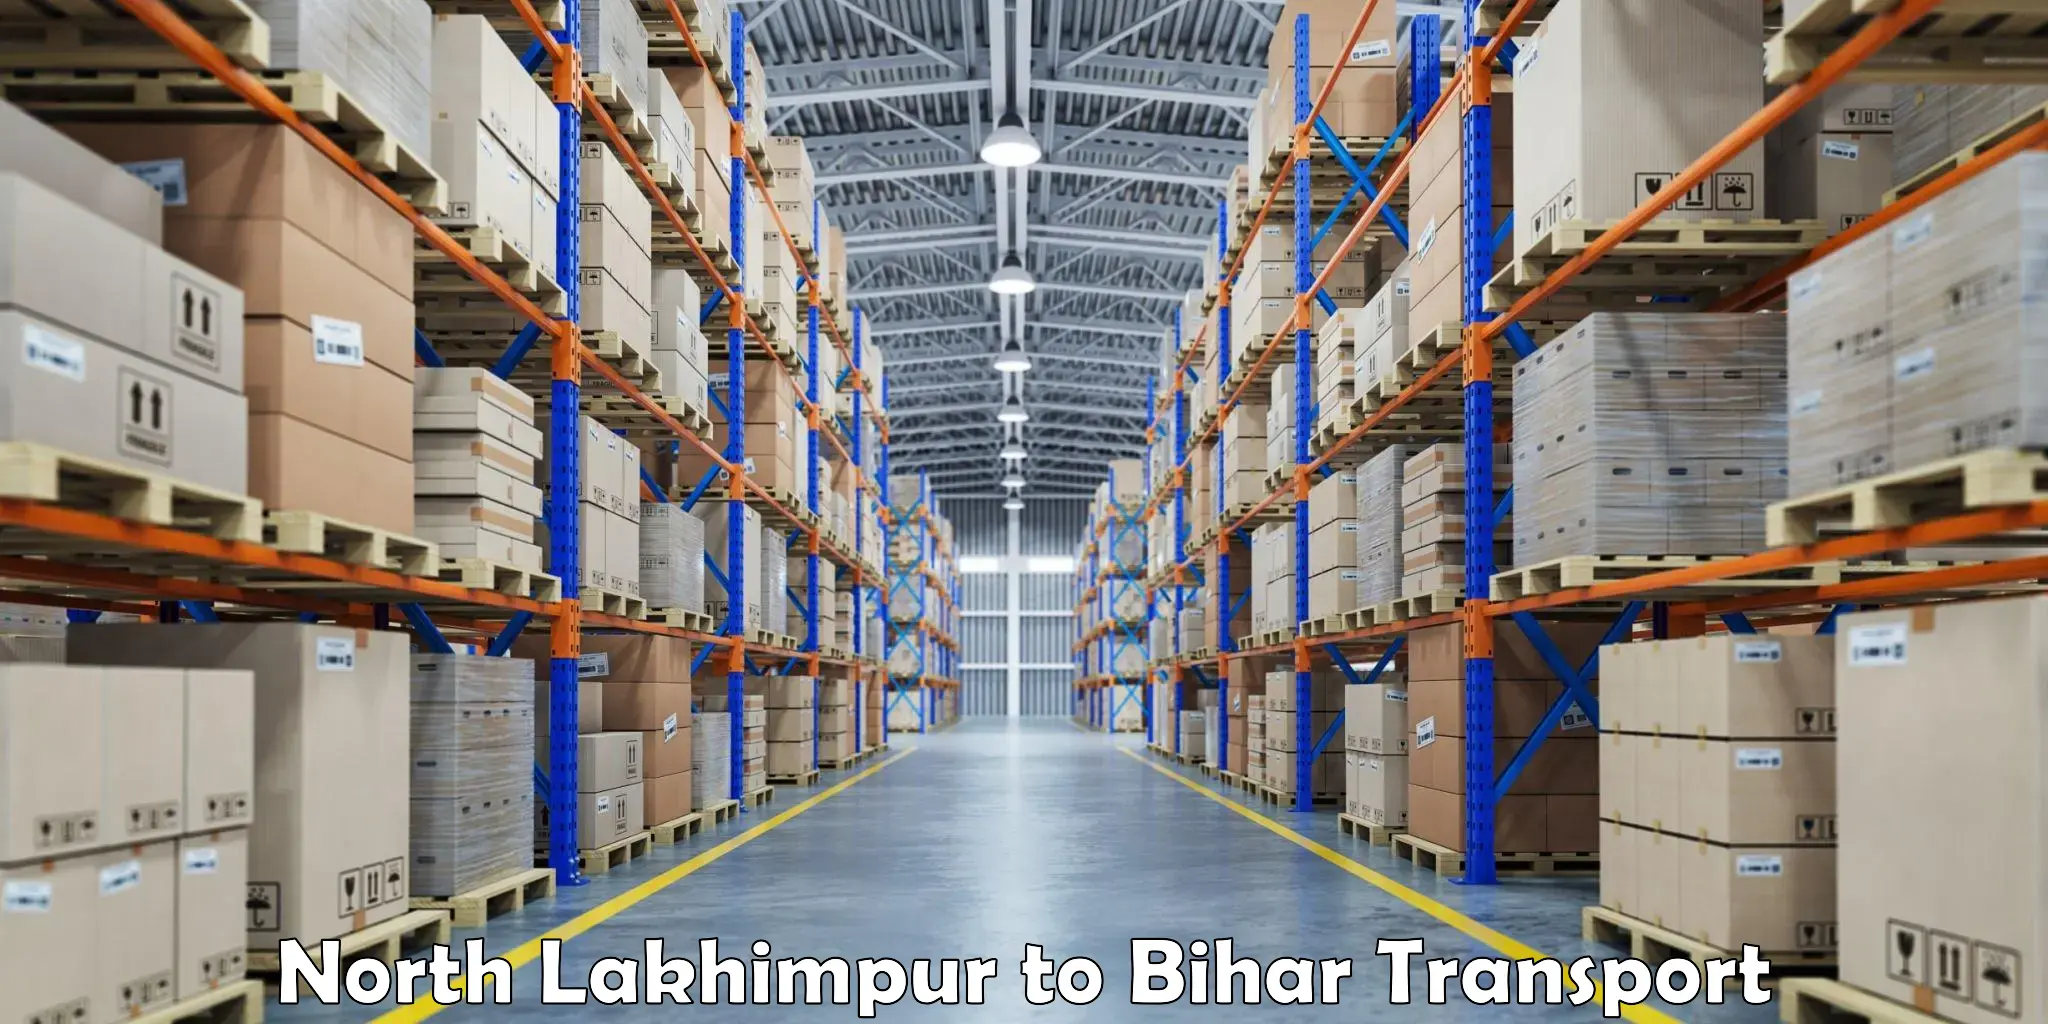 Container transport service in North Lakhimpur to Barauni